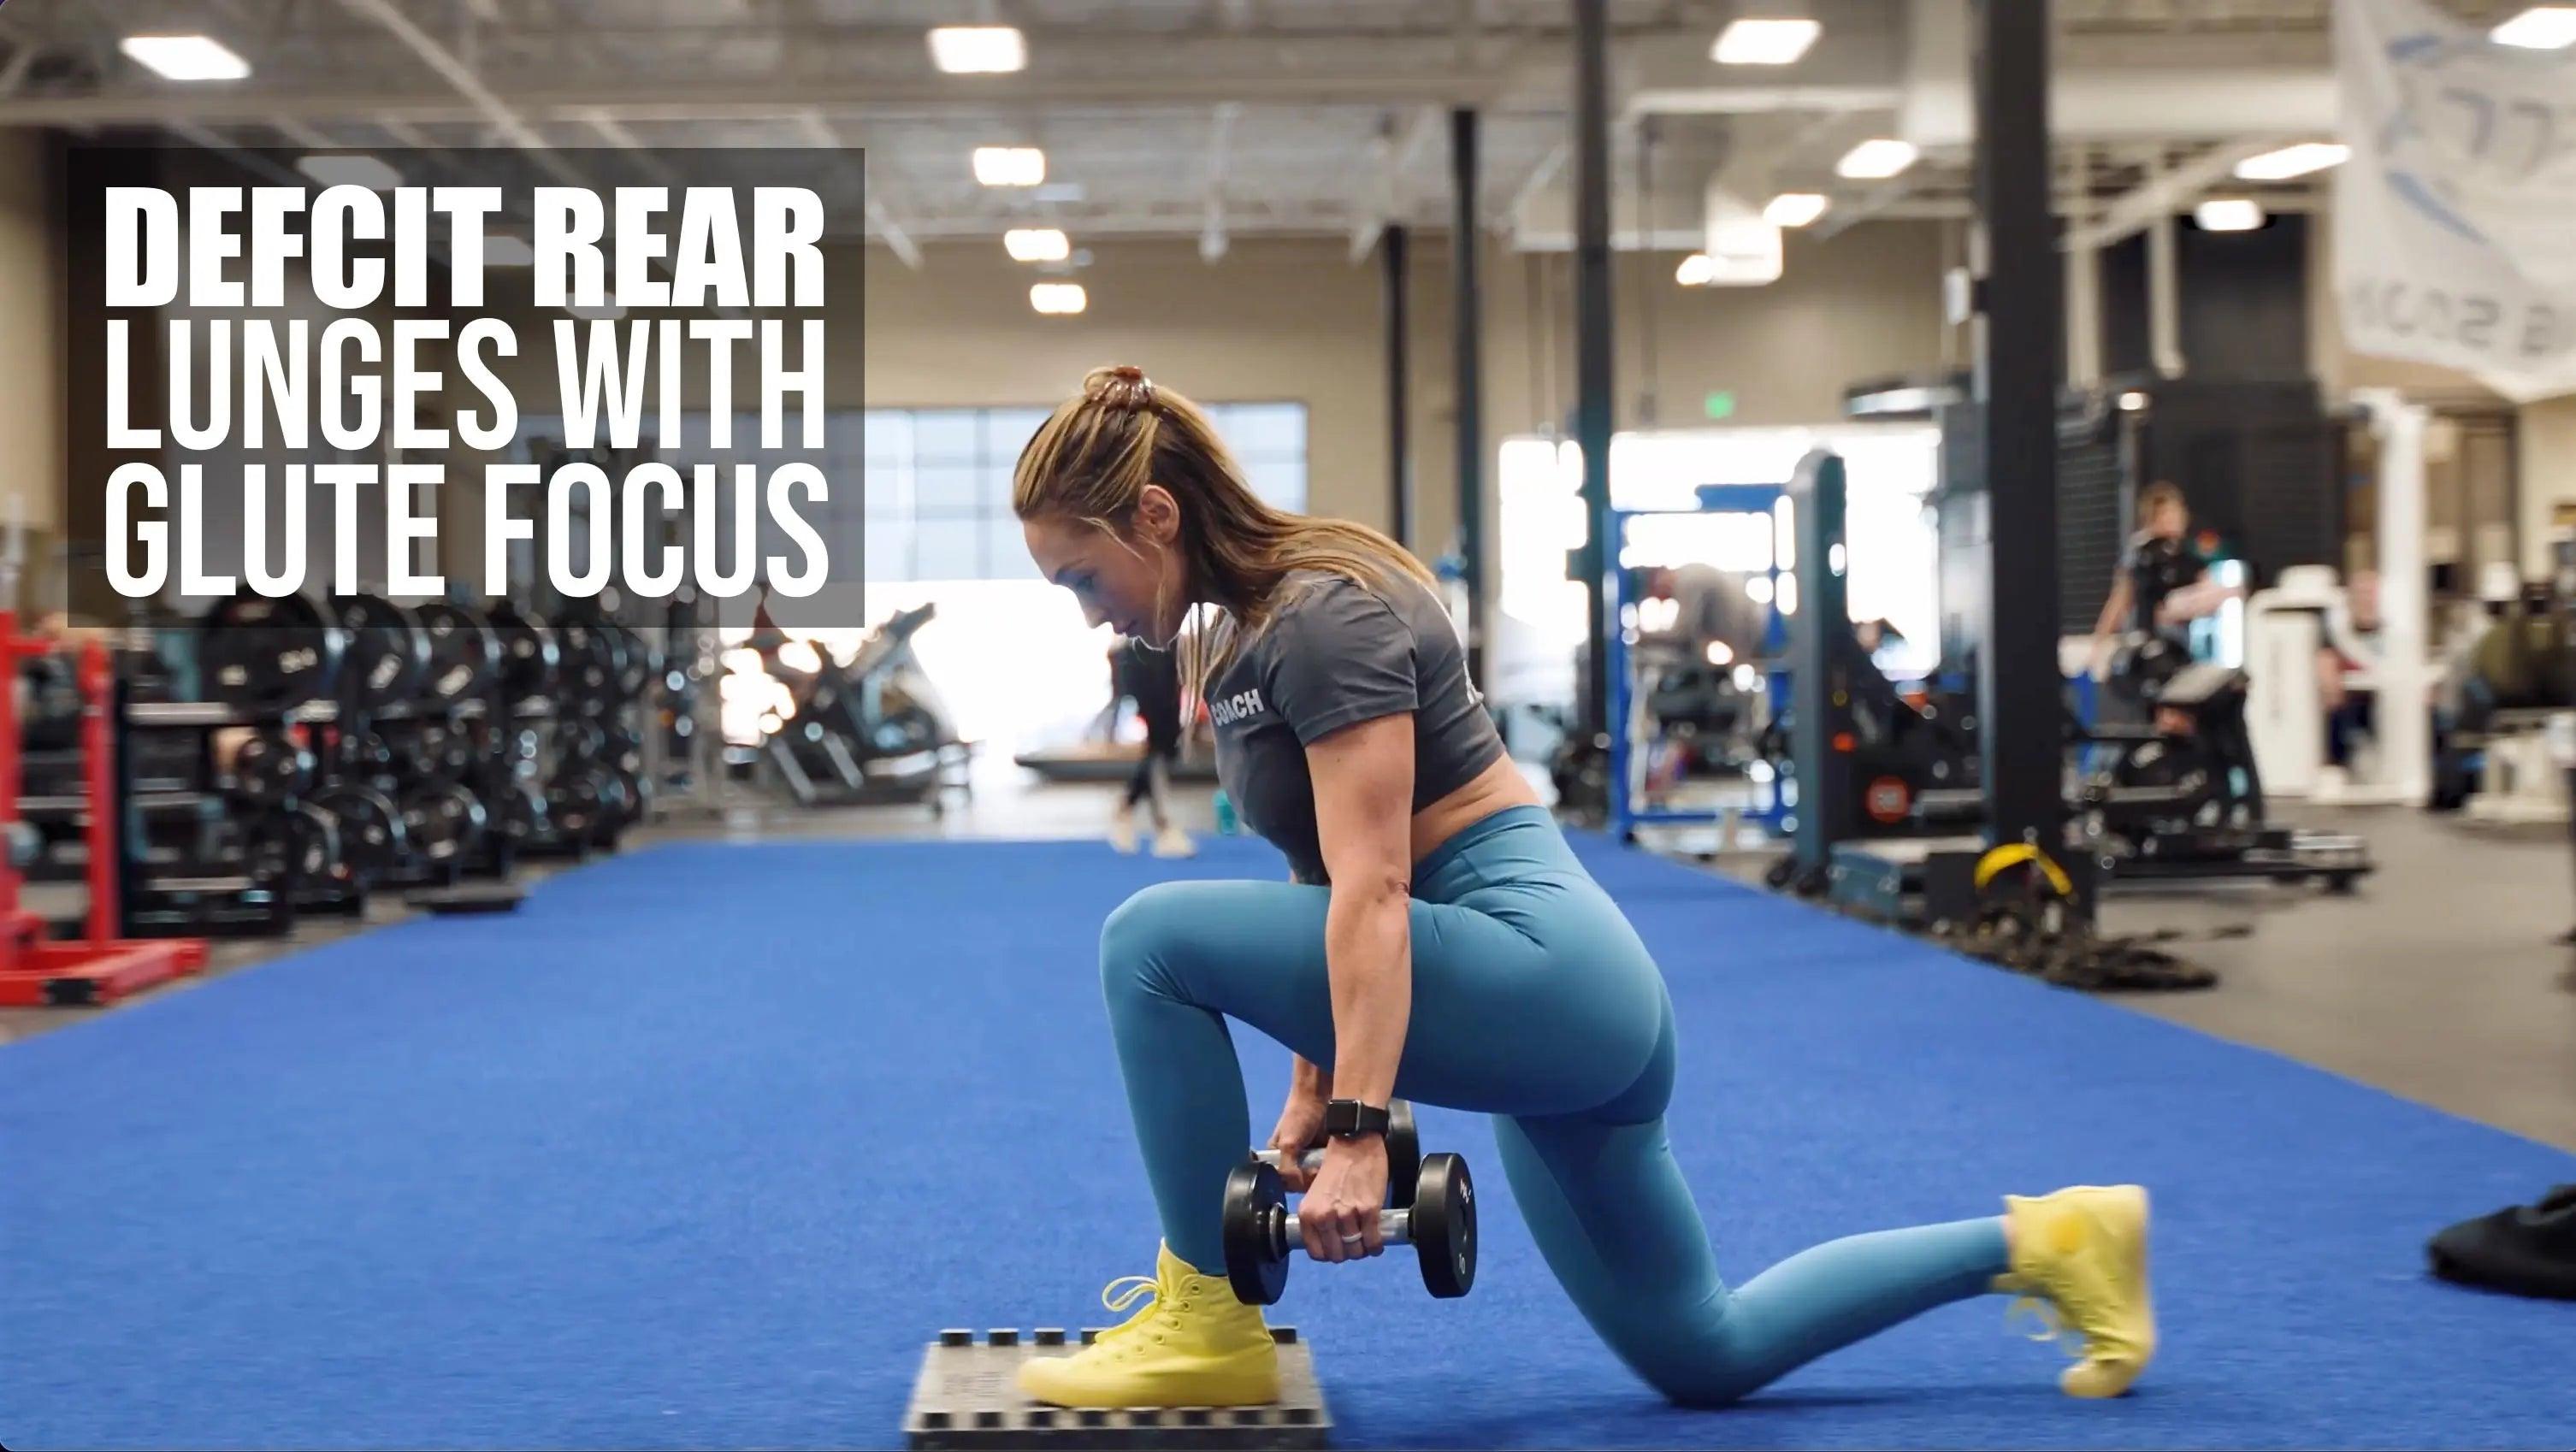 Deficit-Rear-Lunges-with-a-Glute-Focus UXO Supplements